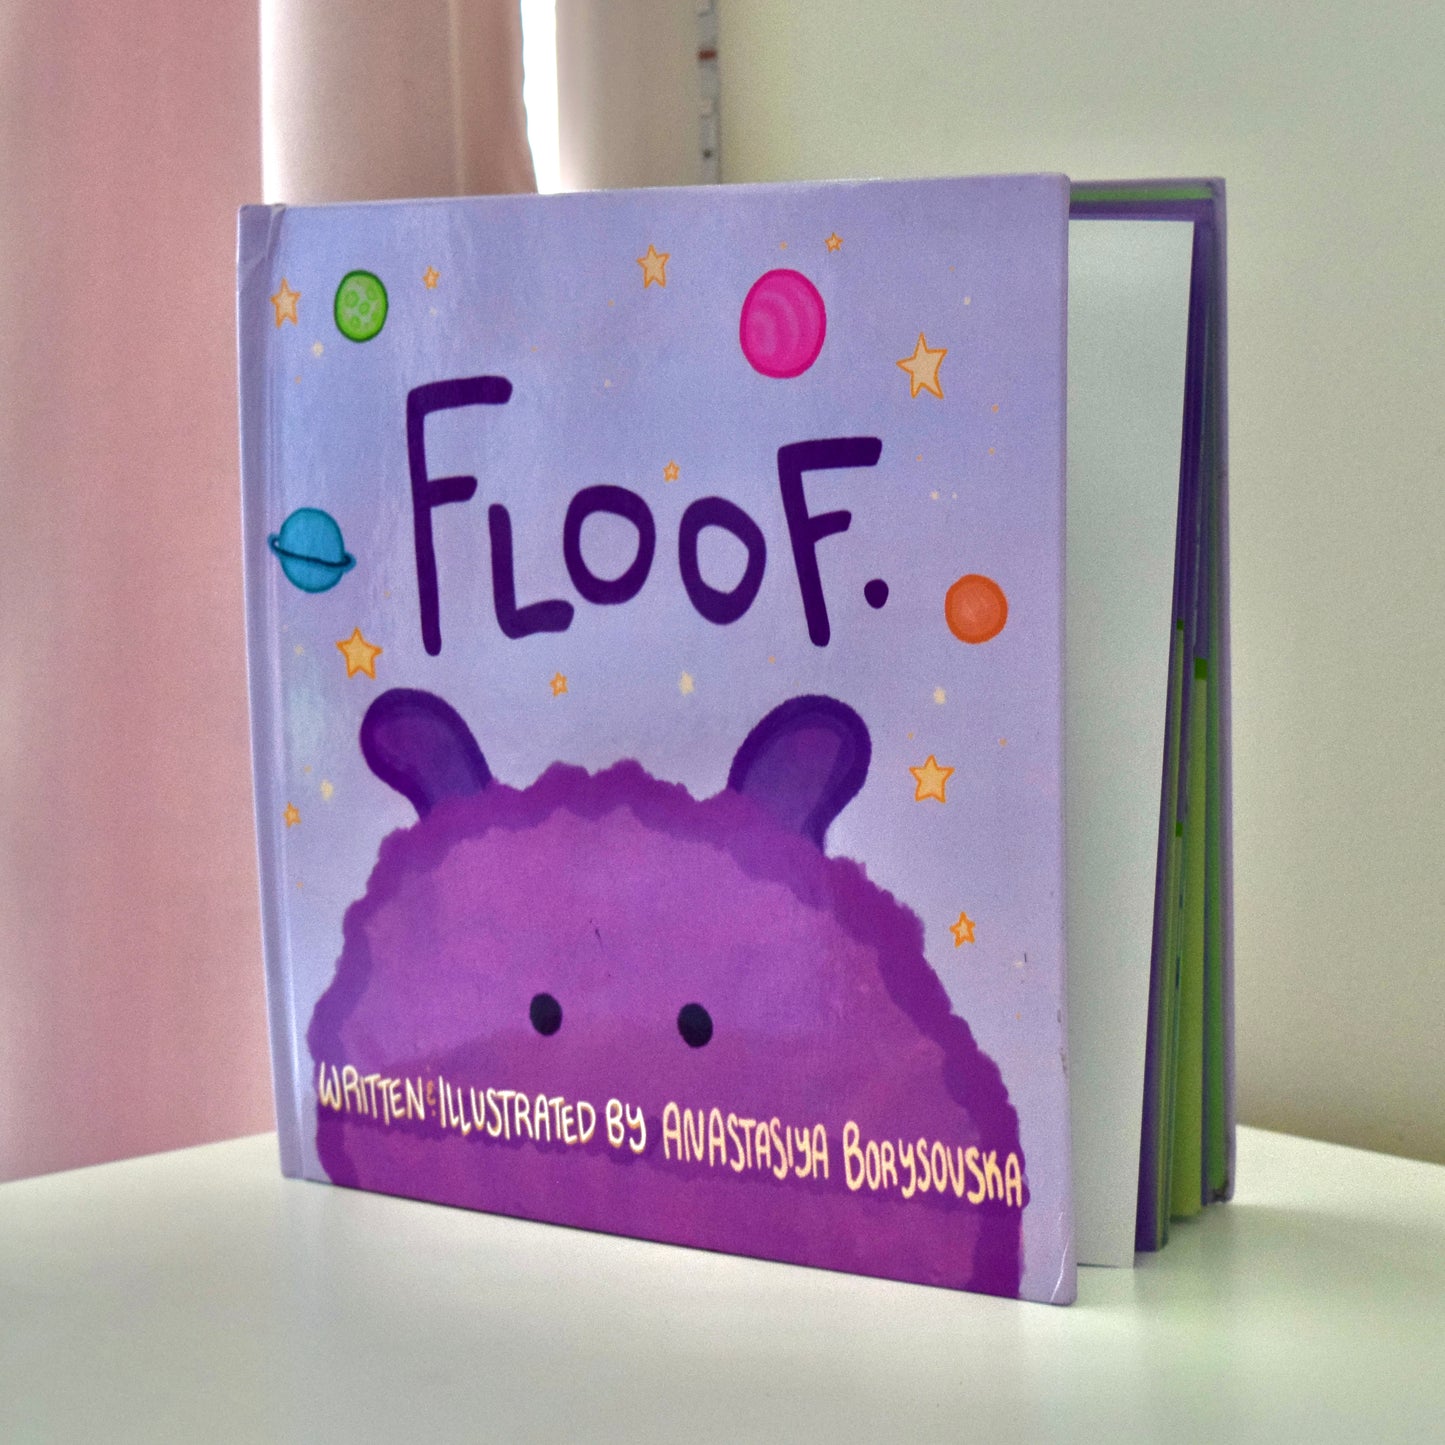 Story book side angle, with a purple alien Floof peeking on the cover.